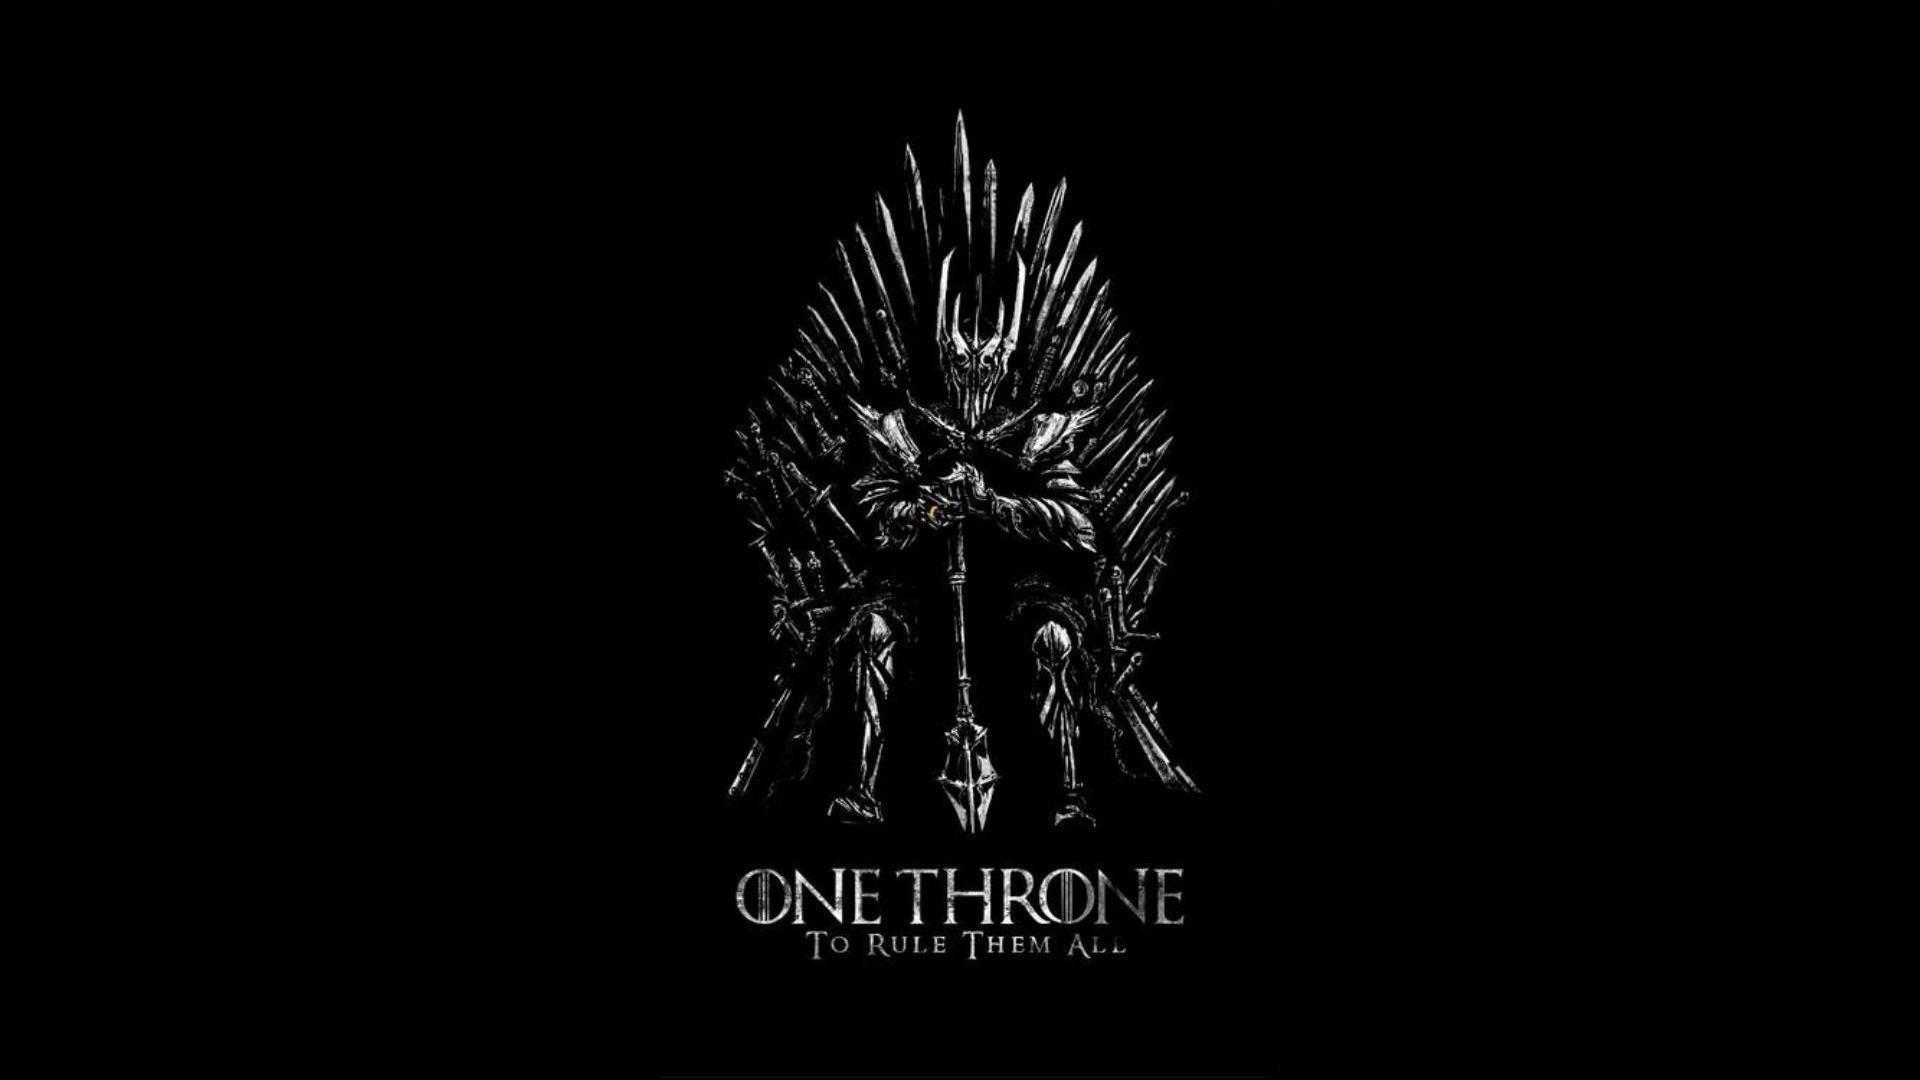 Lord of rings game thrones iron throne wallpaper